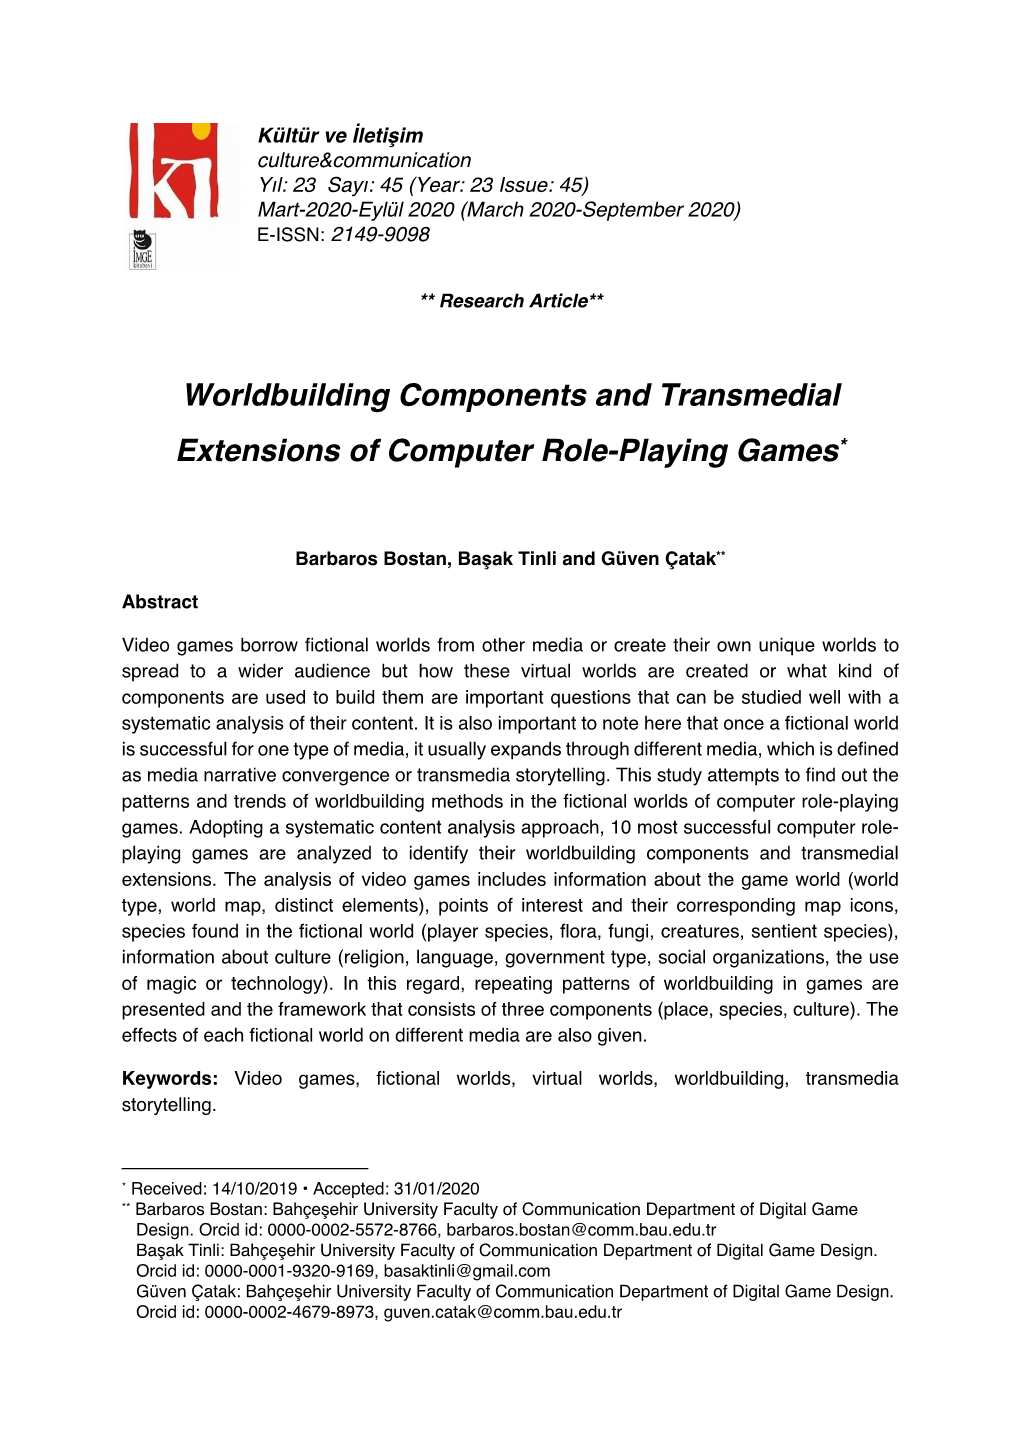 Worldbuilding Components and Transmedial Extensions of Computer Role-Playing Games*